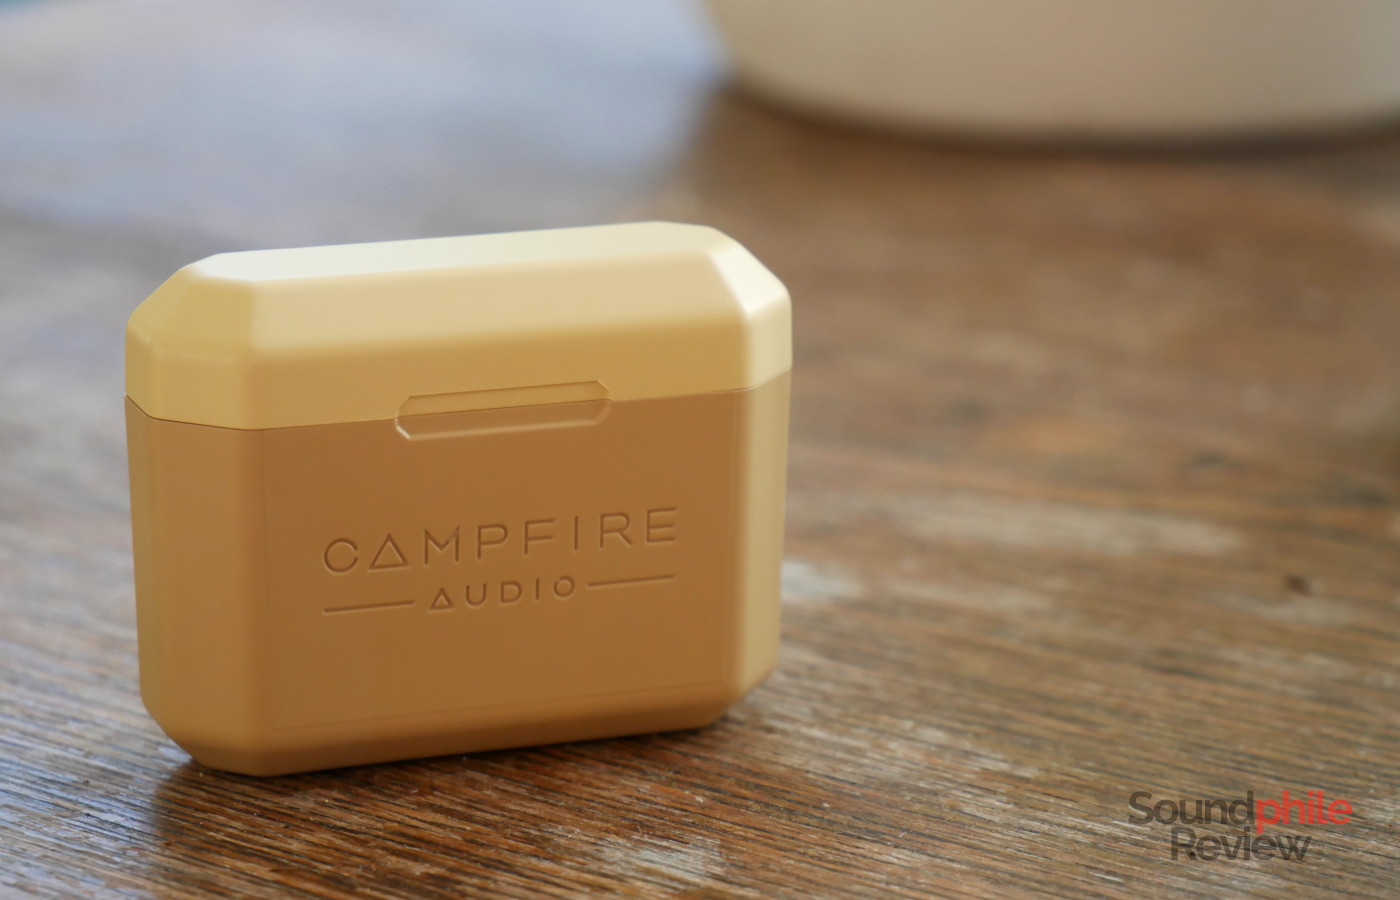 The Campfire Audio Orbit come in a small and light case